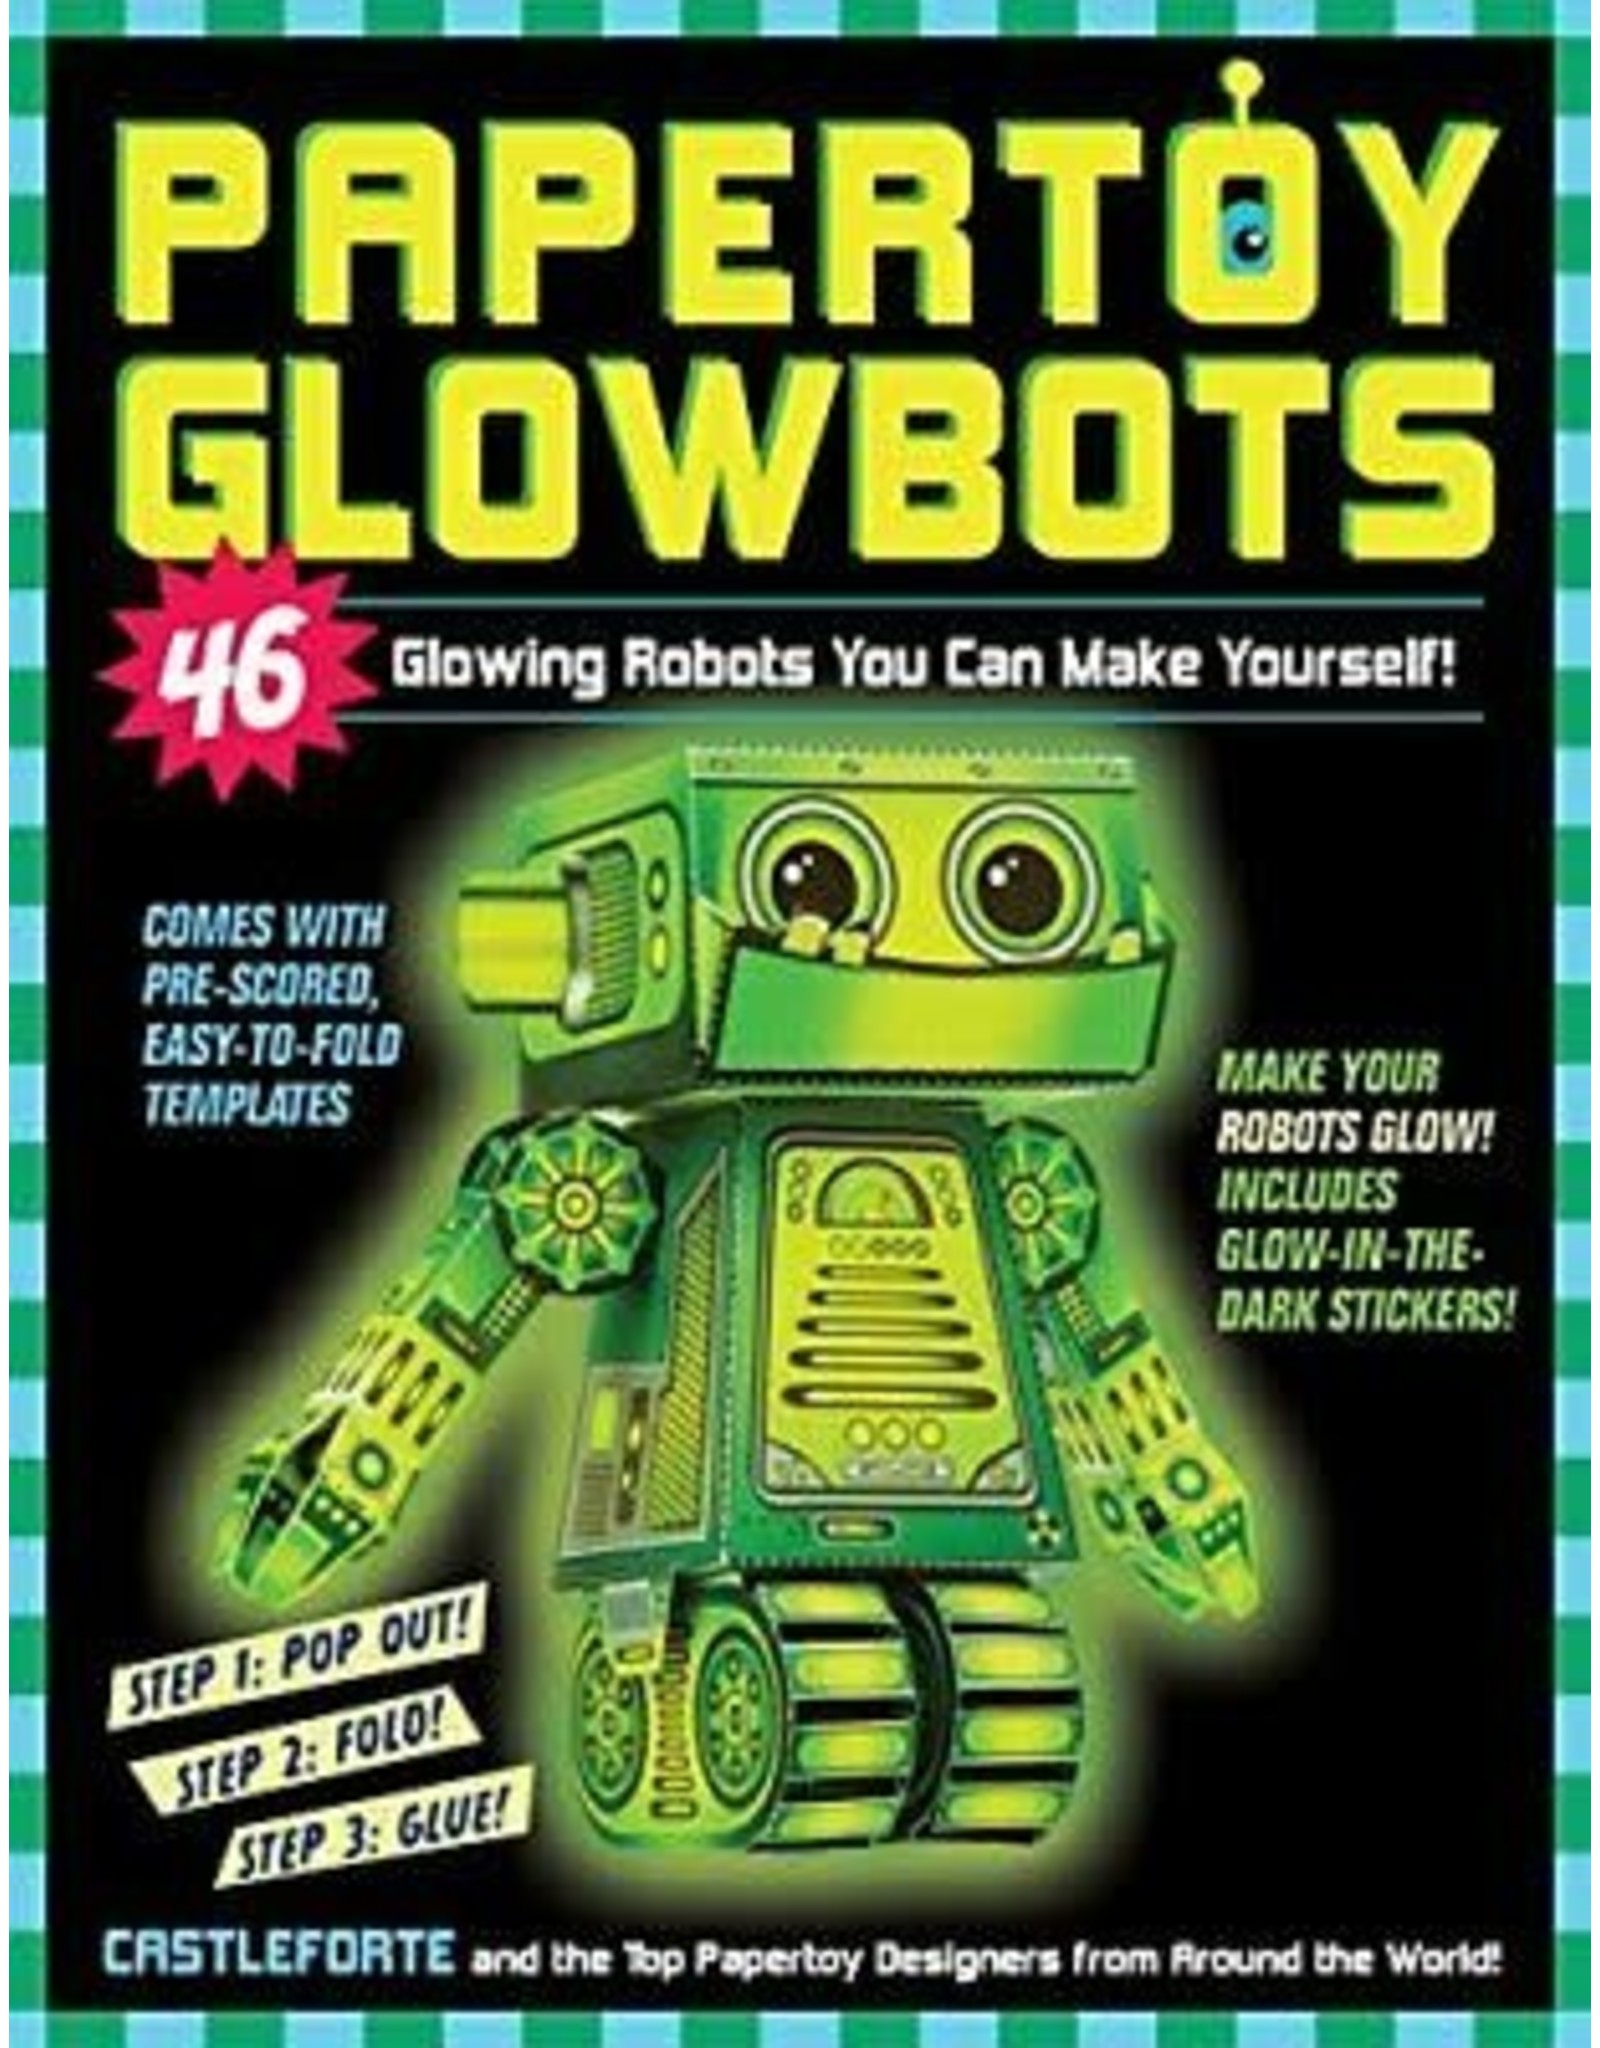 Paper Toy Glowbots Book